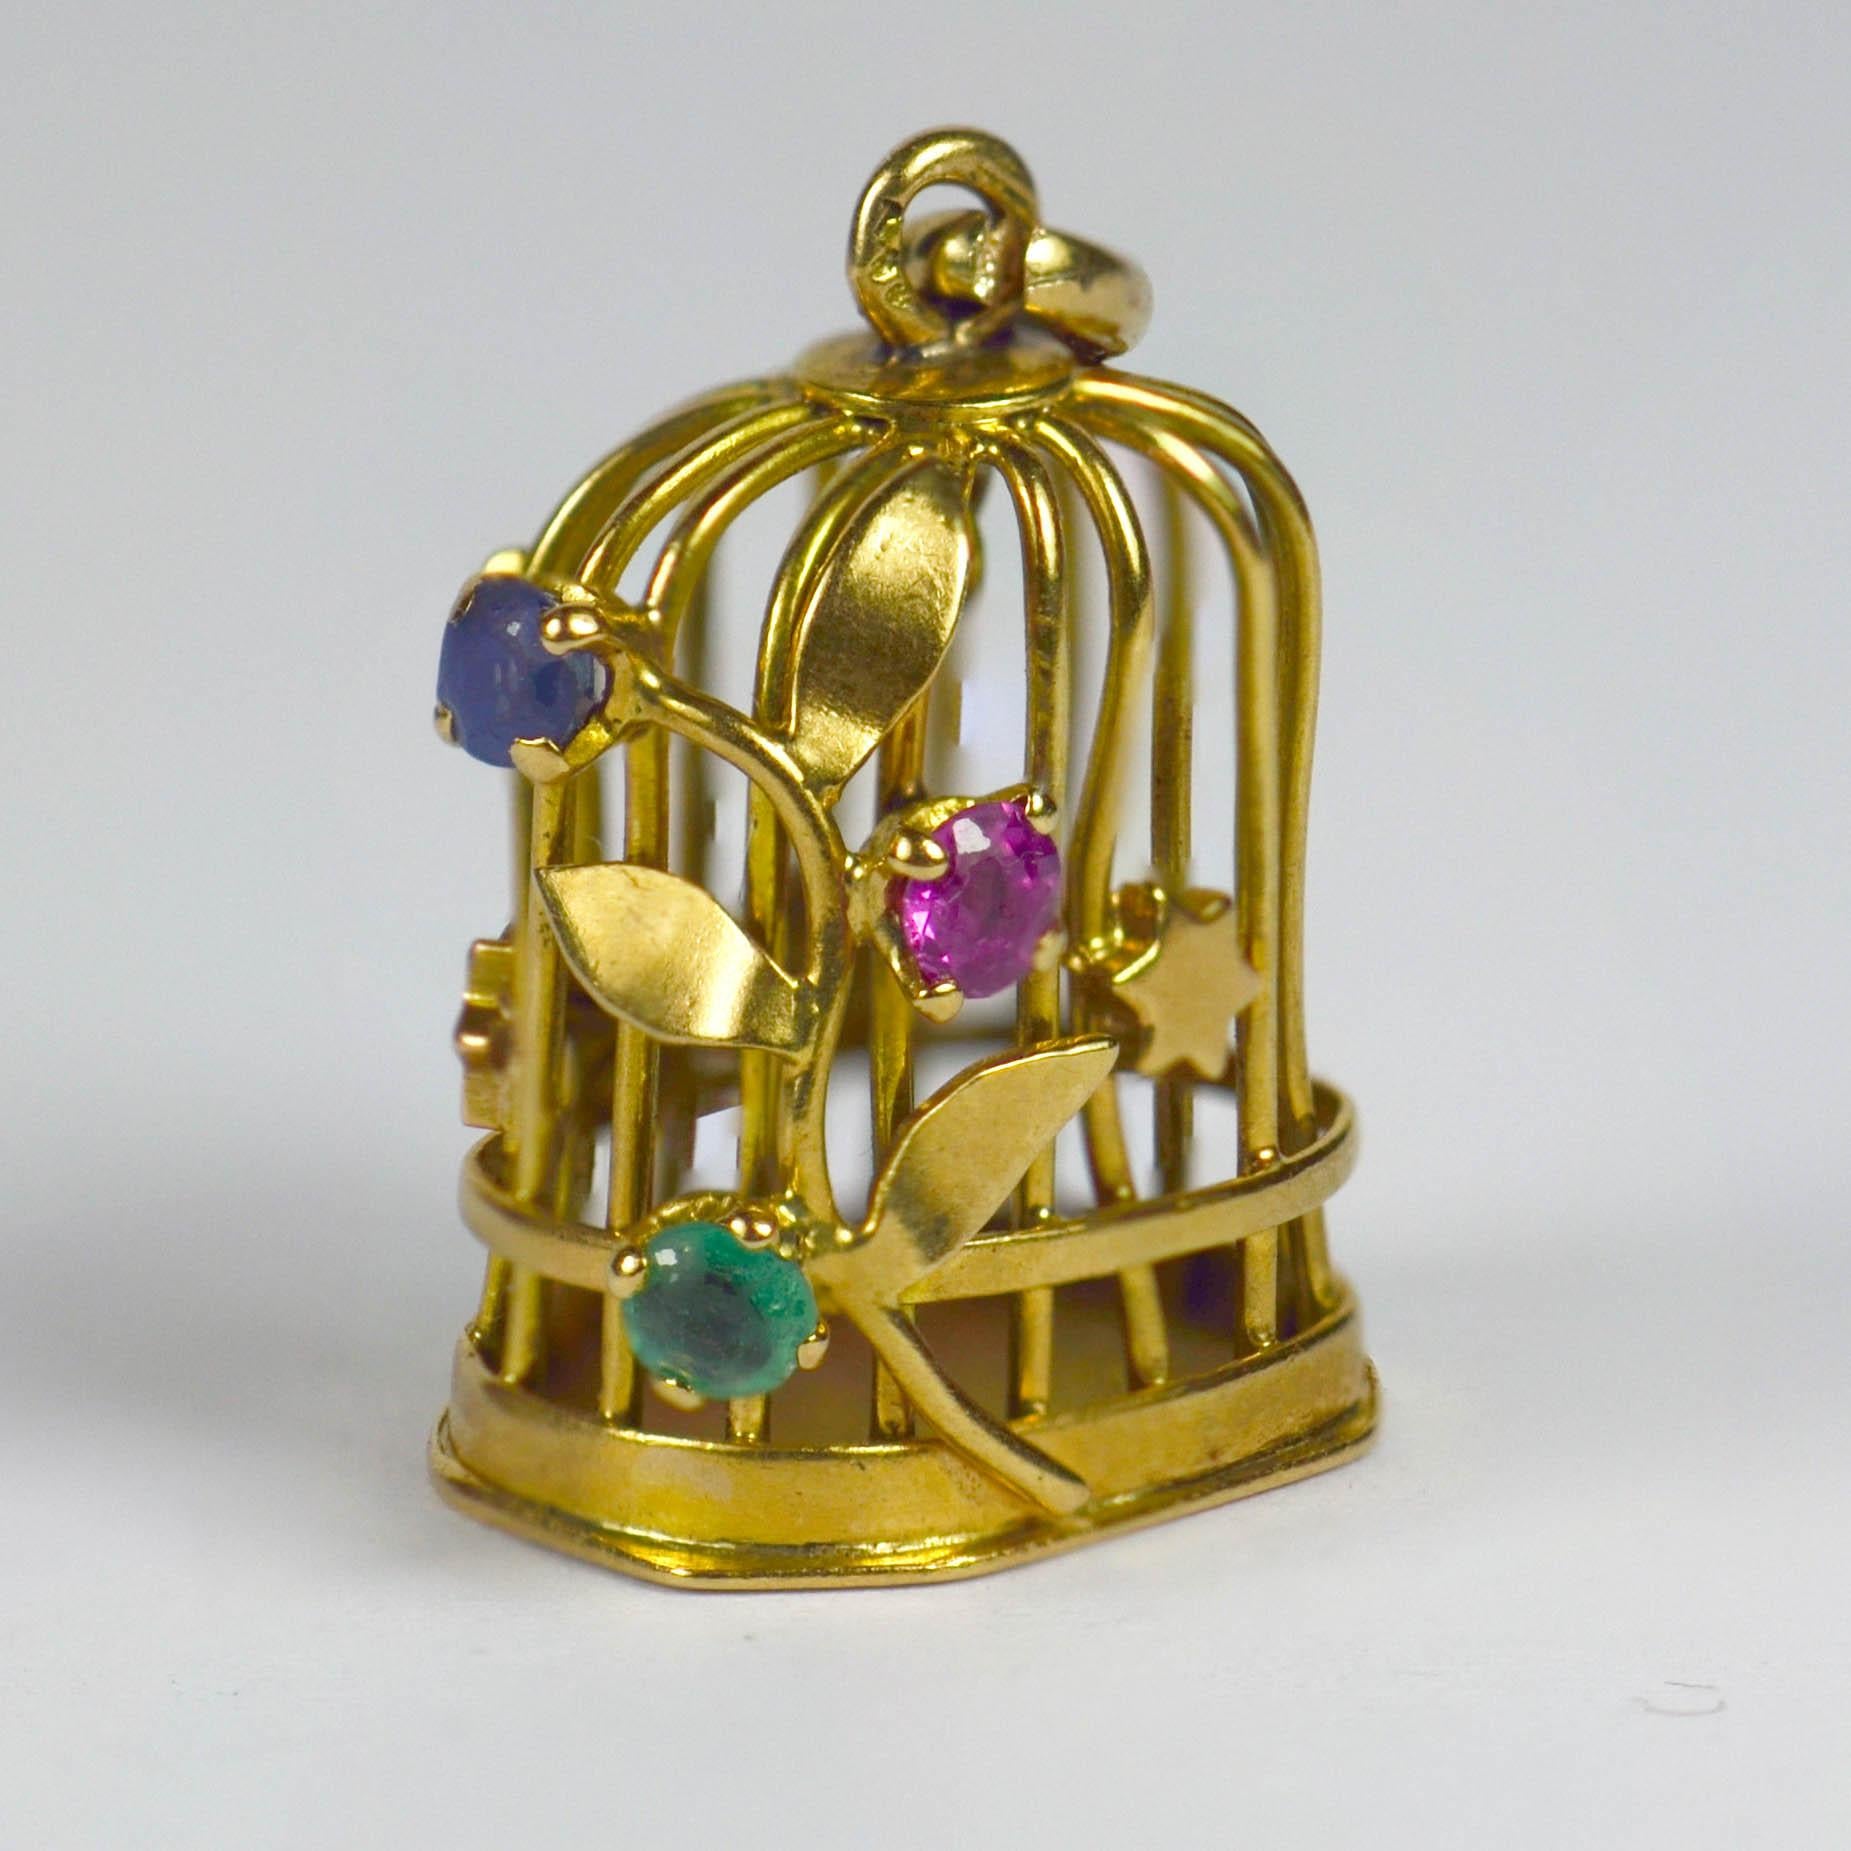 A French 18 karat yellow gold charm pendant designed as a bird cage with gem set flowering vine and stars, and a gold bird on a perch inside. Set with blue green and pink round cut paste, the charm is stamped with the eagle's head for 18 karat gold